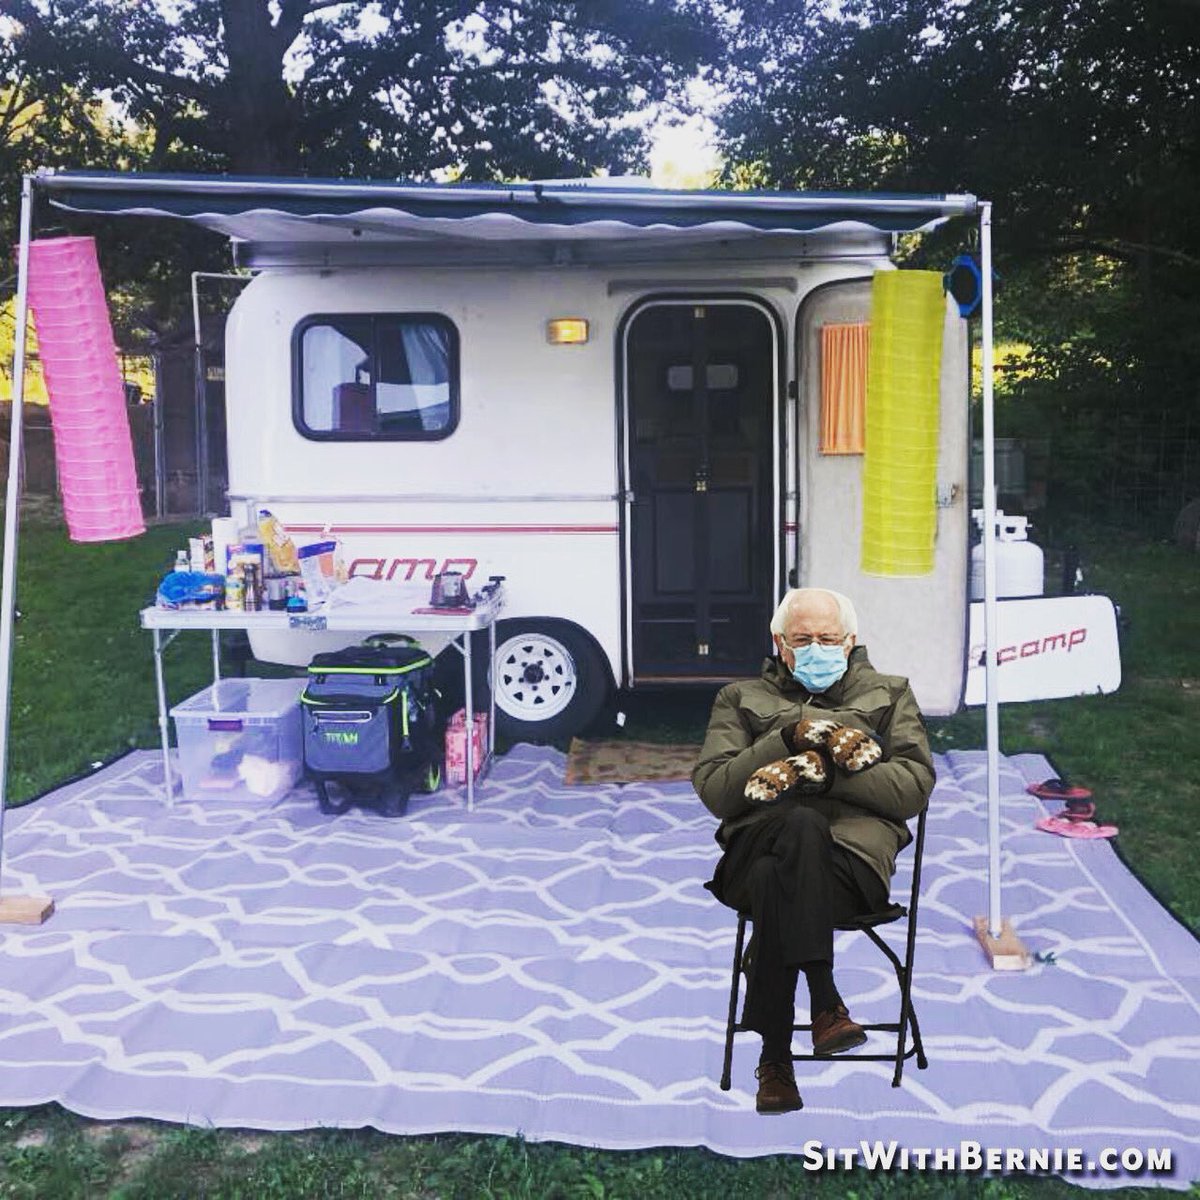 Just scamping with Bernie 🤣 

*Follow our Scamp Adventures on IG Scamp_Jobin

#sitwithbernie #berniesanders #scampjobin #scamp13 #scamp #scamptrailer #scamplife #scamping #tinyrv #camper #travel #happycamper #camplife #traveltrailer #RV #fiberglasstrailer #rvshare #camperrental